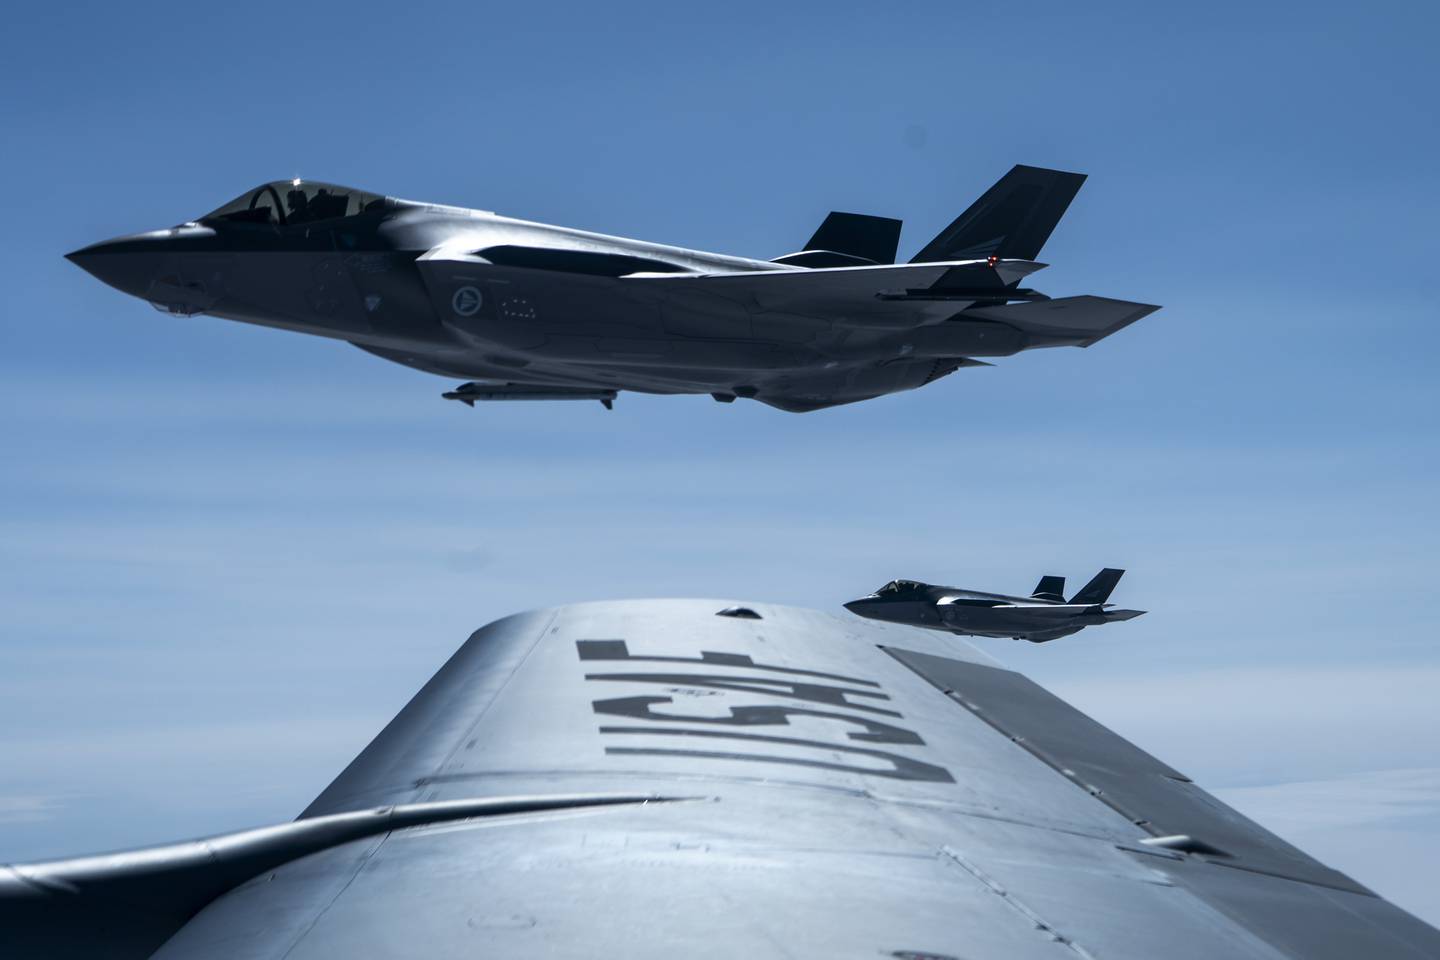 Purchases of F-35 fighter jets have helped significantly increase emissions from the Norwegian defense sector.  The average fuel consumption is 60 percent higher than that of older F-16s, the Defense Ministry previously informed Dagsavisen.